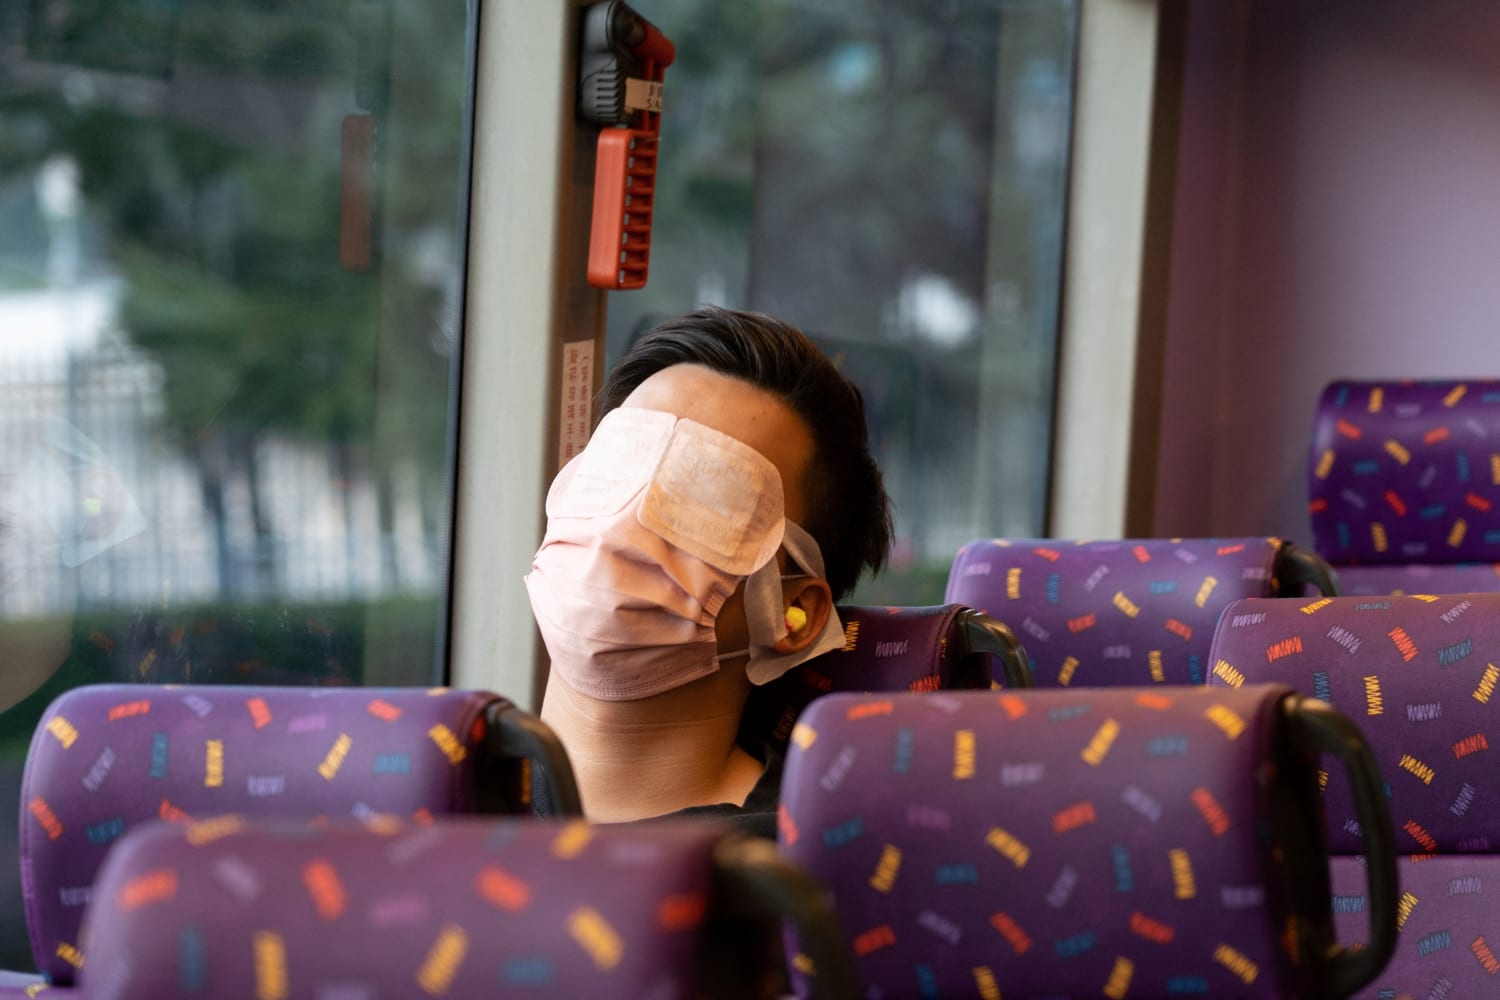 This bus won’t get you out of Hong Kong, but it might get you to sleep